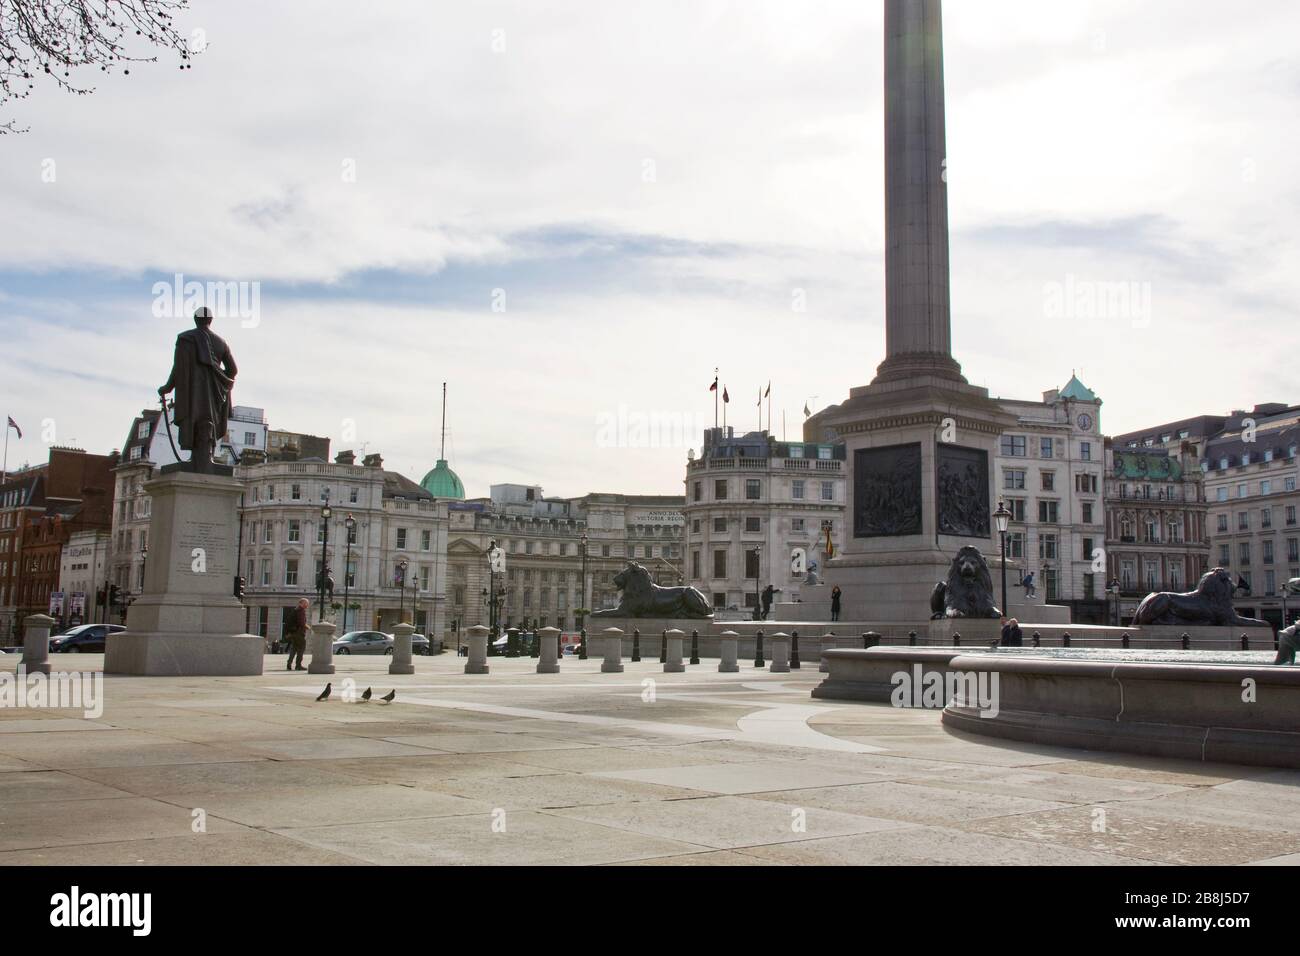 Coronavirus in London: An empty Trafalgar Square which would normally be full of tourists Stock Photo